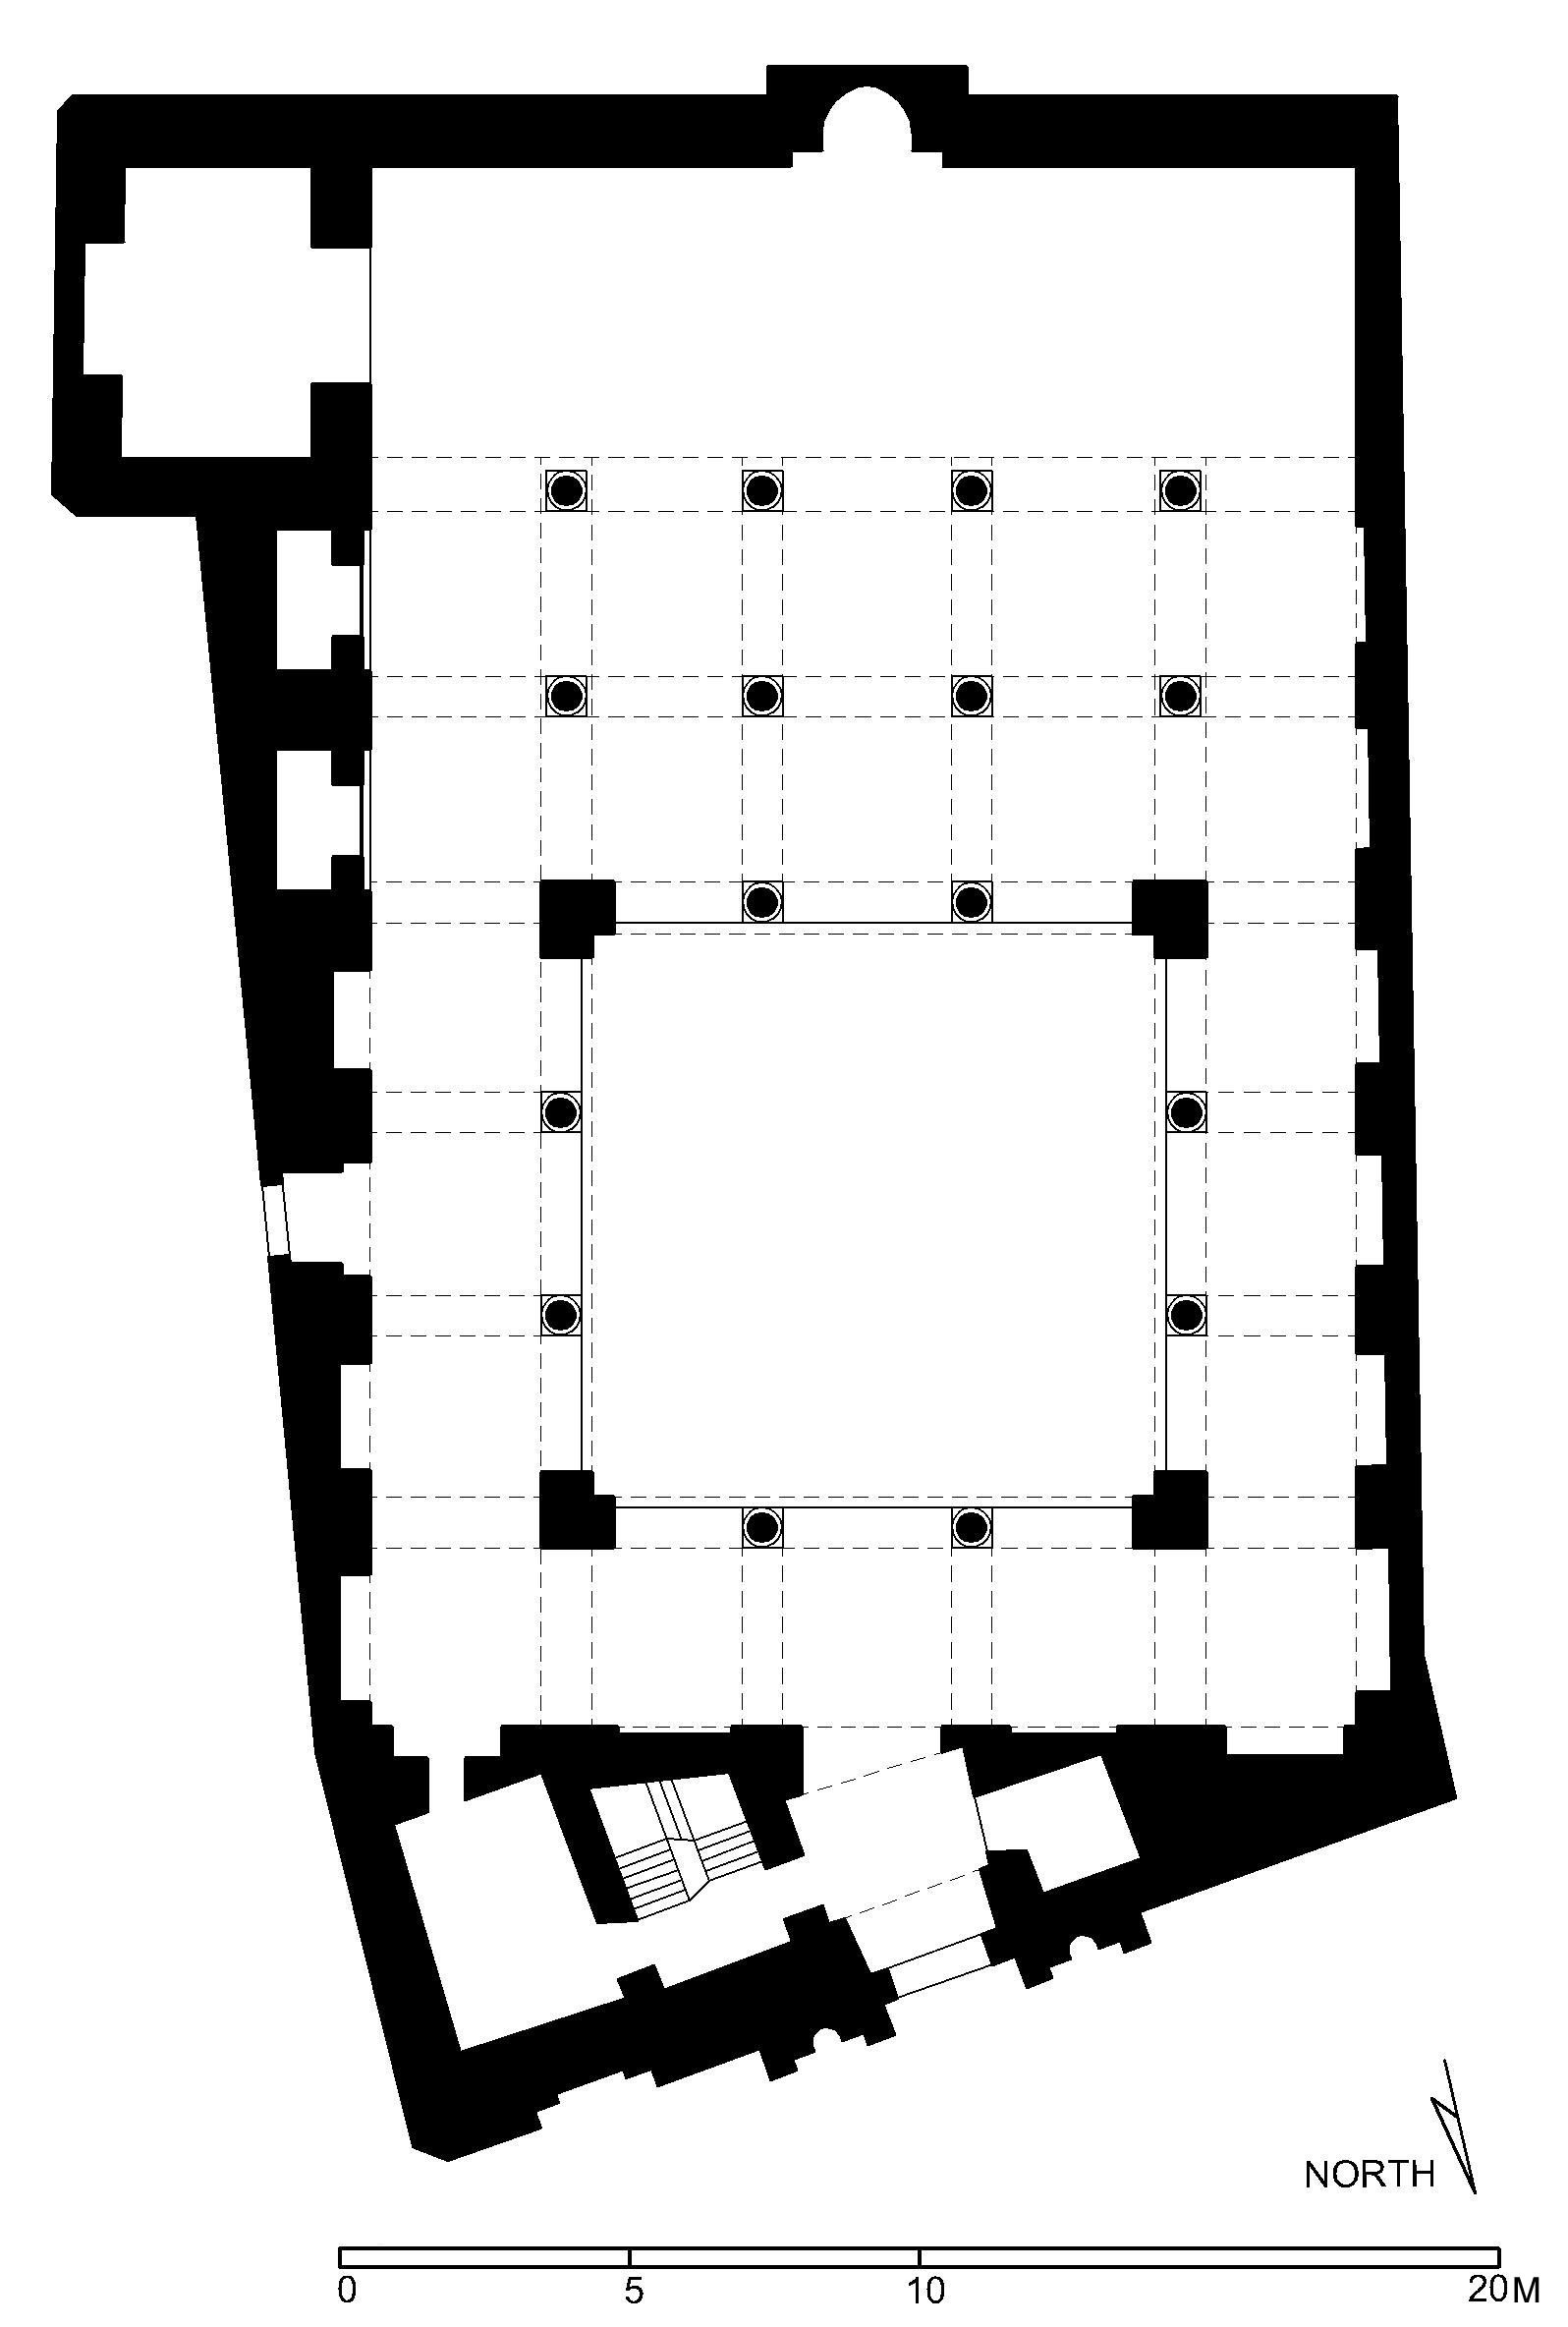 Jami' al-Aqmar - Floor plan of mosque (after Meinecke) in AutoCAD 2000 format. Click the download button to download a zipped file containing the .dwg file. 